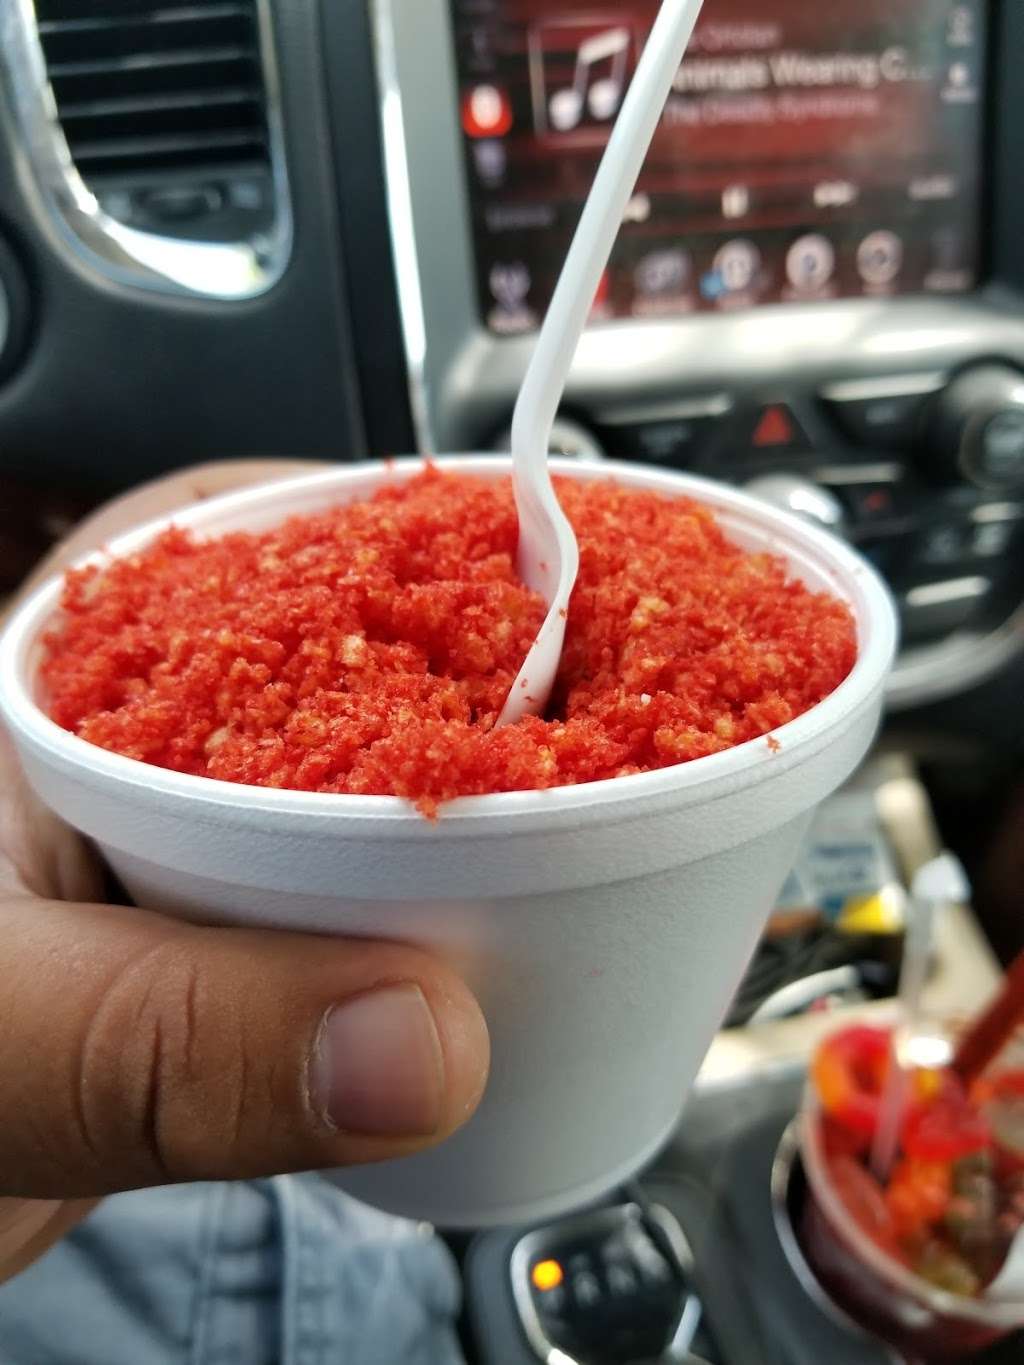 AJs Snowcones | 1807 Broadway St, Pearland, TX 77581 | Phone: (281) 766-7669